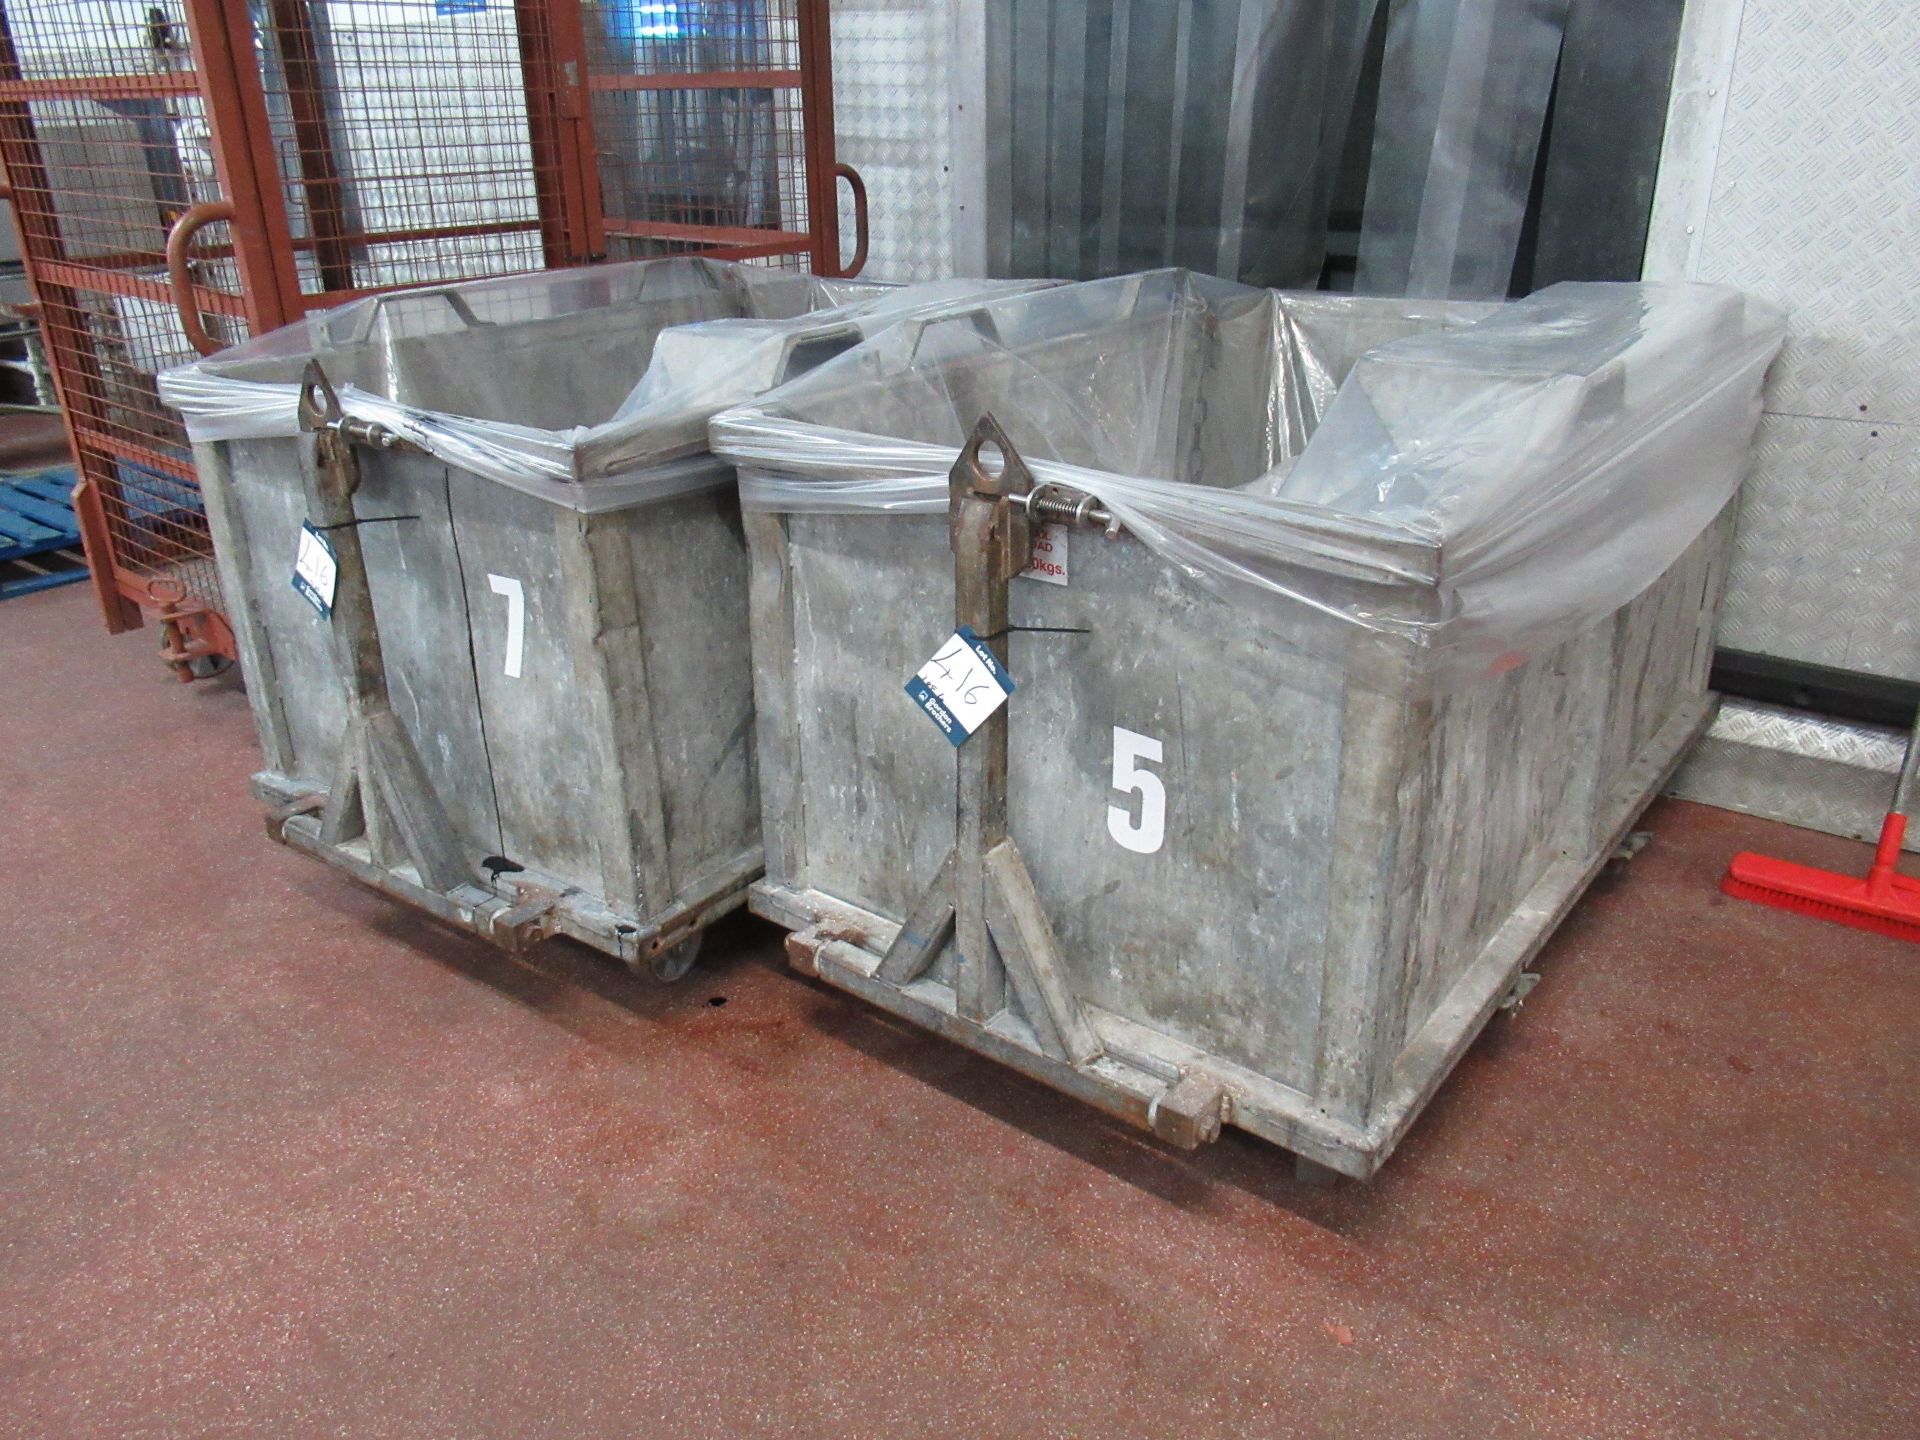 4 Galvanised mobile four wheel waste bins, 1600 x 950 x 750mm high with fold down draw bar - Image 7 of 9